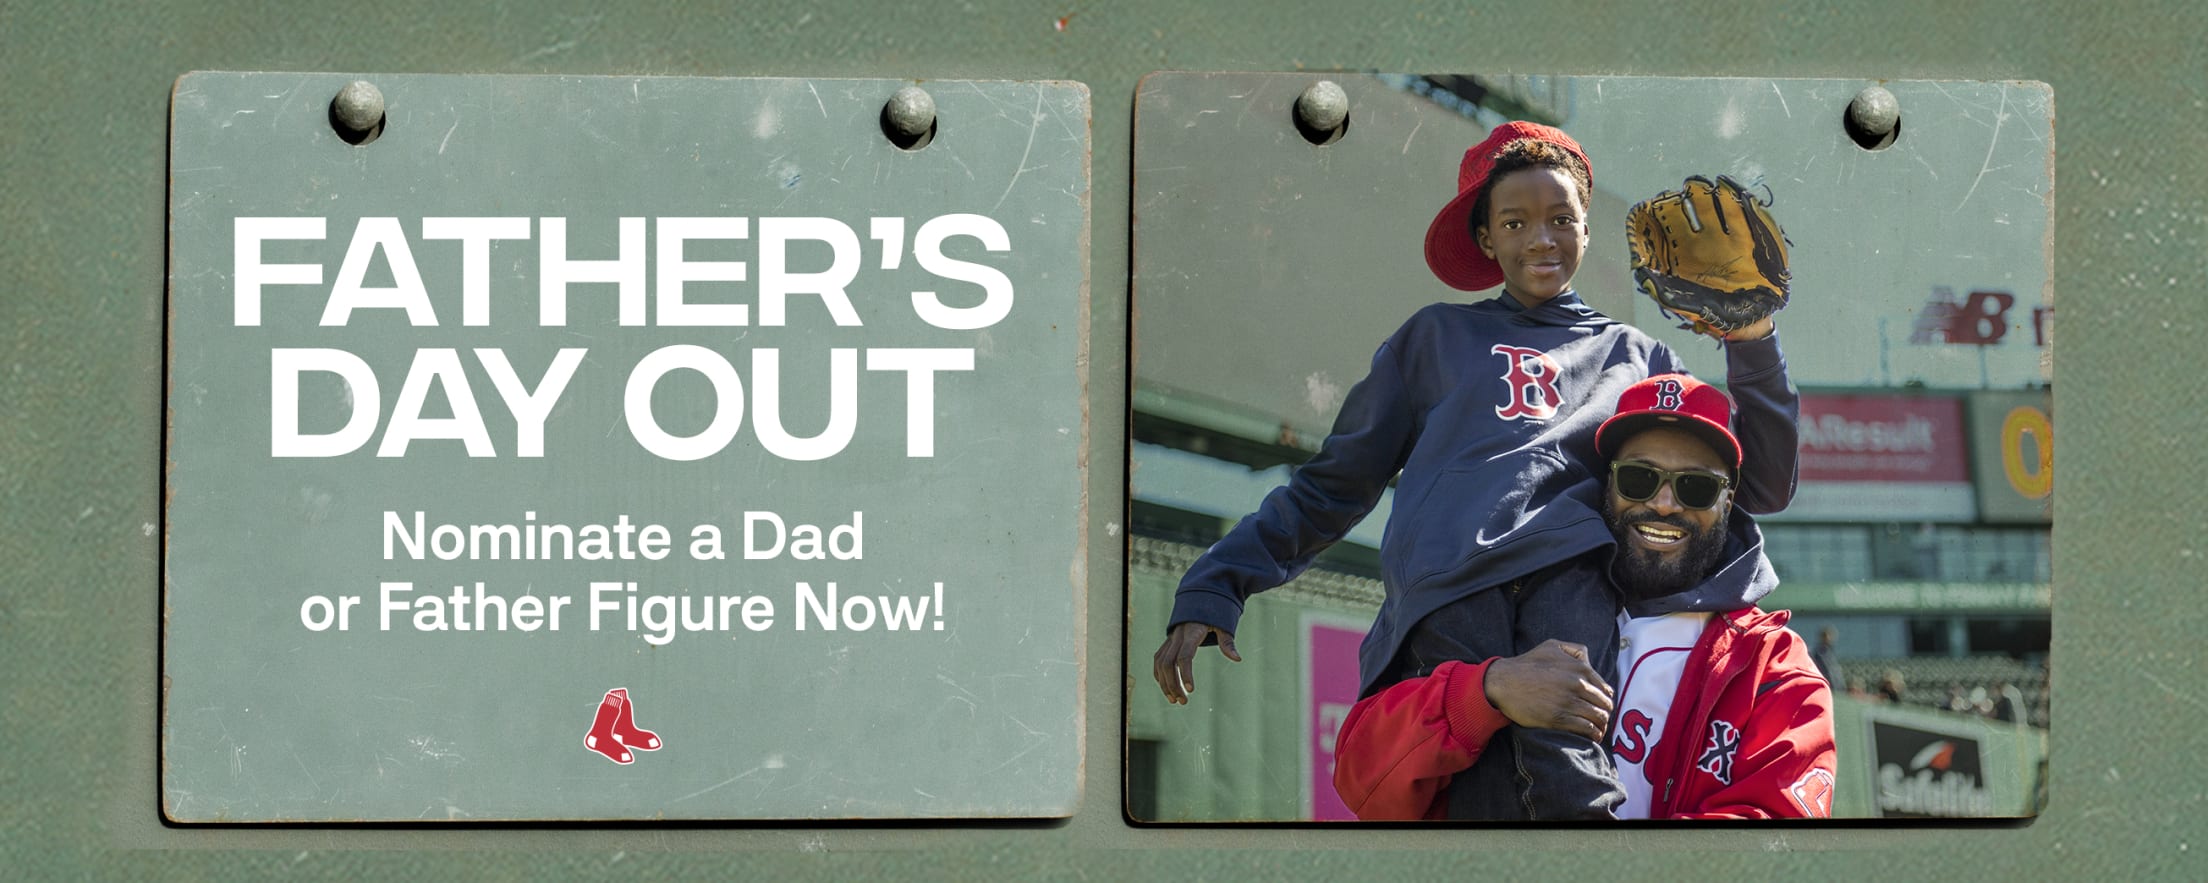 happy fathers day red sox